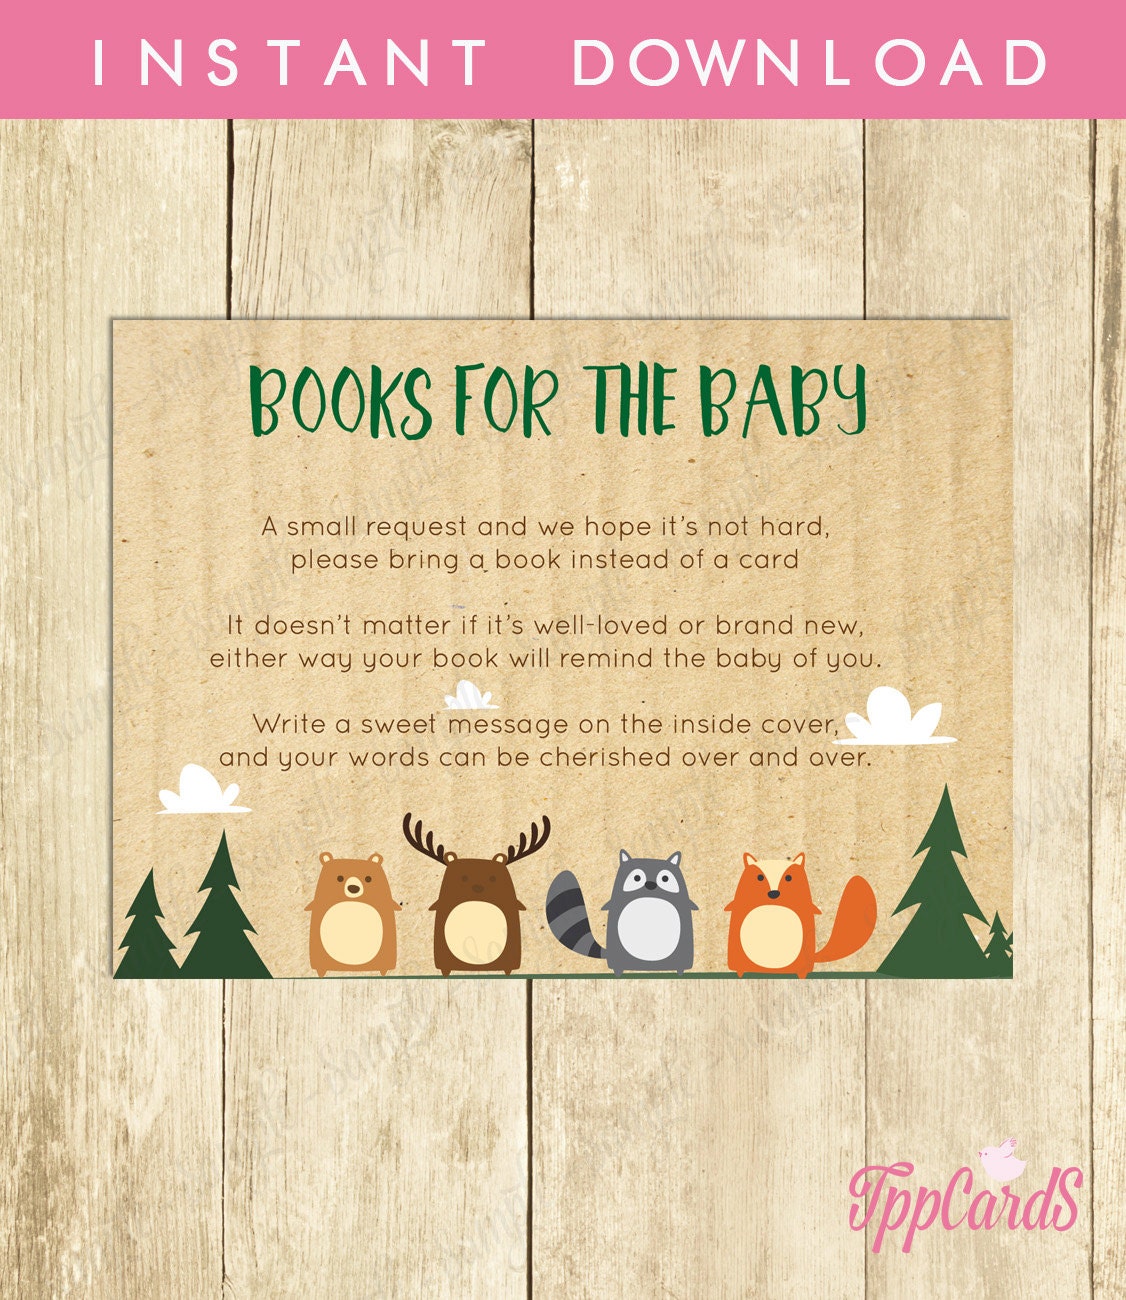 instead-of-cards-bring-books-baby-shower-free-printable-baby-shower-bring-book-instead-of-card